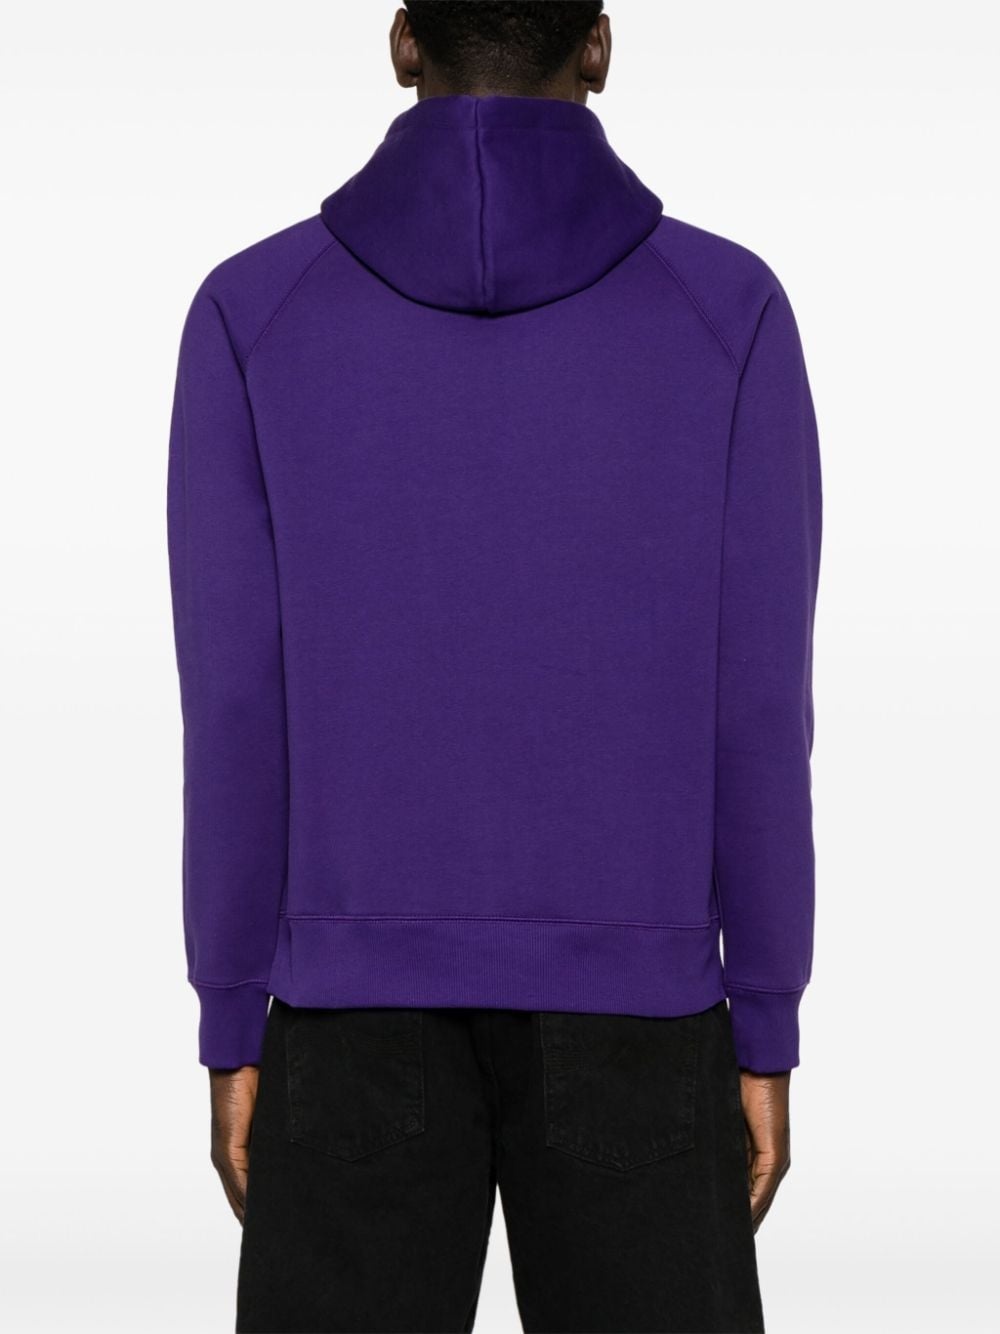 Chase cotton hoodie - 4